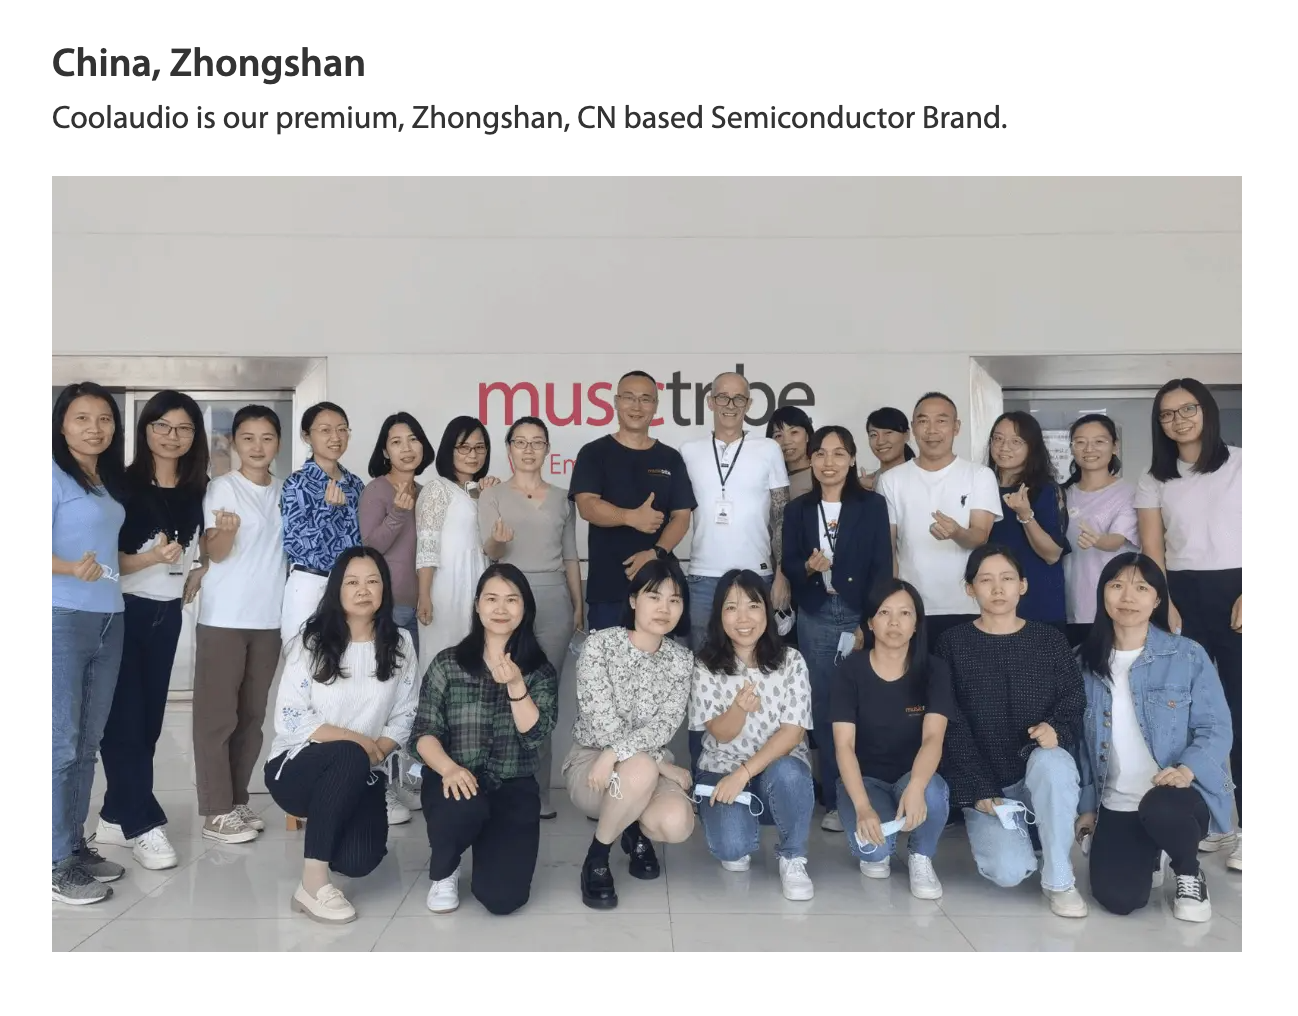 A screenshot from the Music Tribe website shows workers in Zhongshan posing for a photo